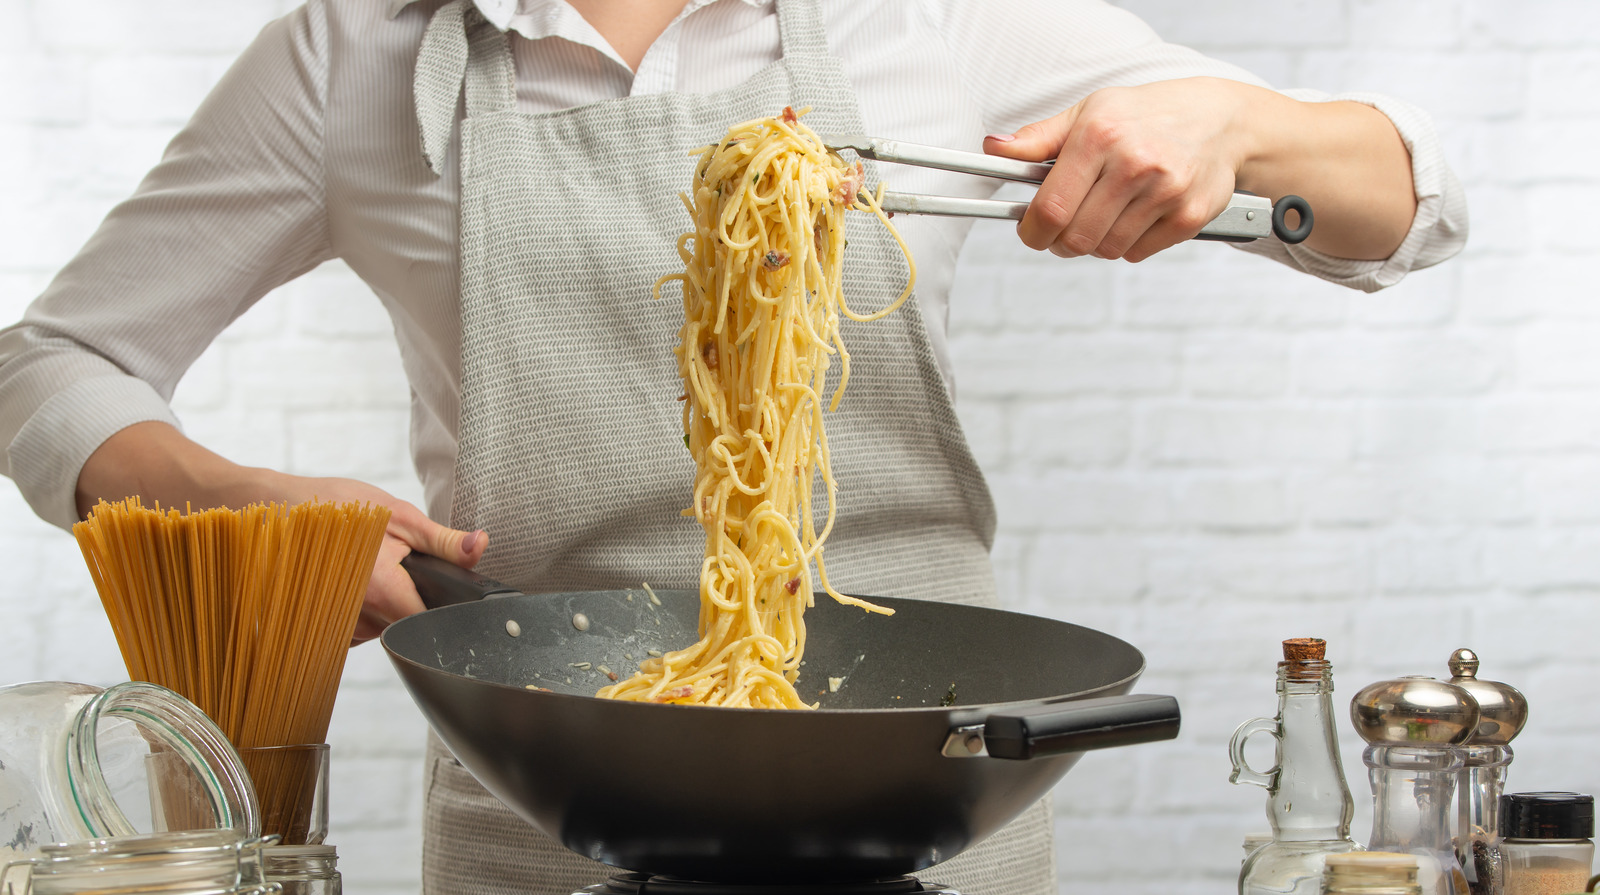 The,Chef,Pours,Boiled,Spaghetti,Into,Pan,Wok,For,Cooking